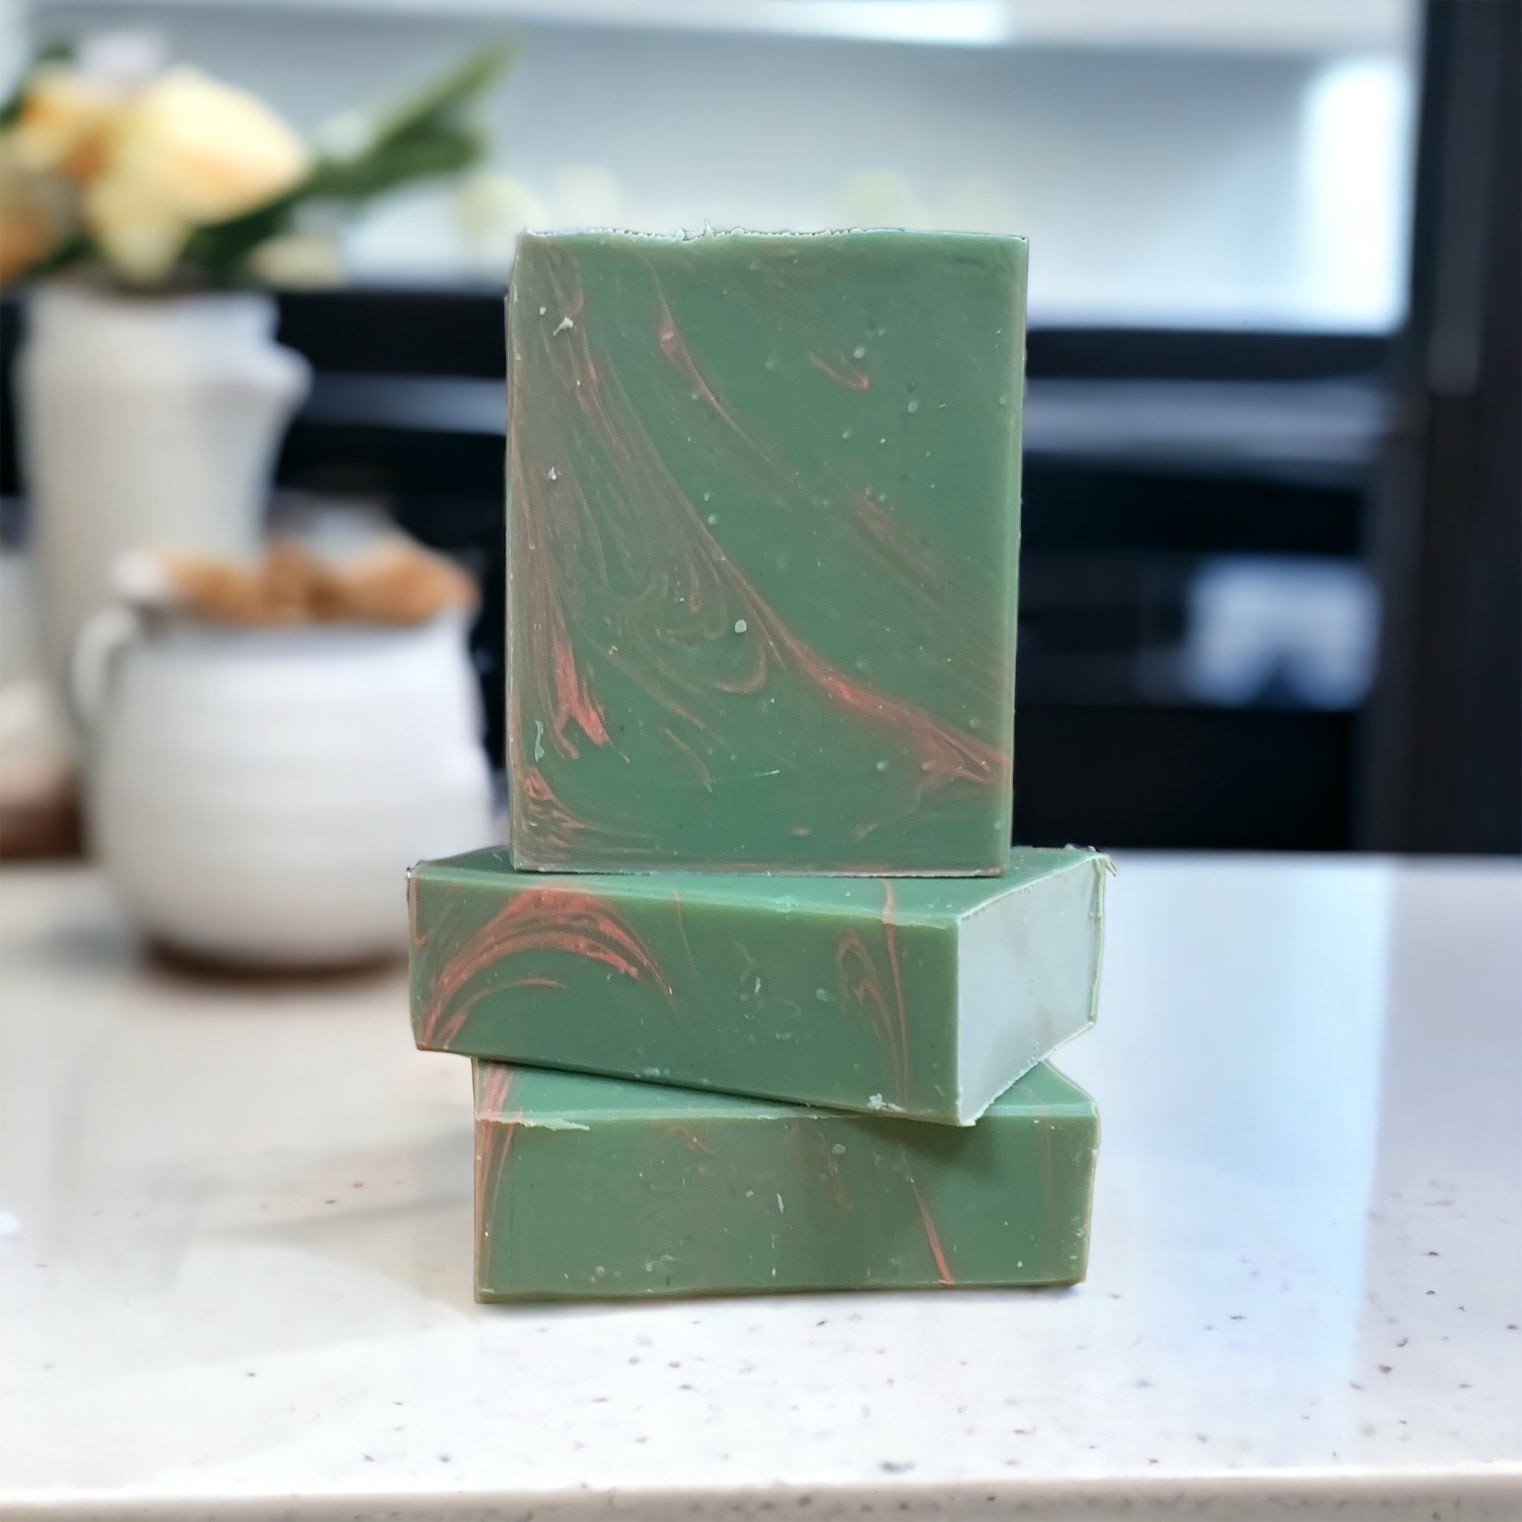 A green and pink rectangular bar of soap on a white countertop with a vase of flowers in the background.